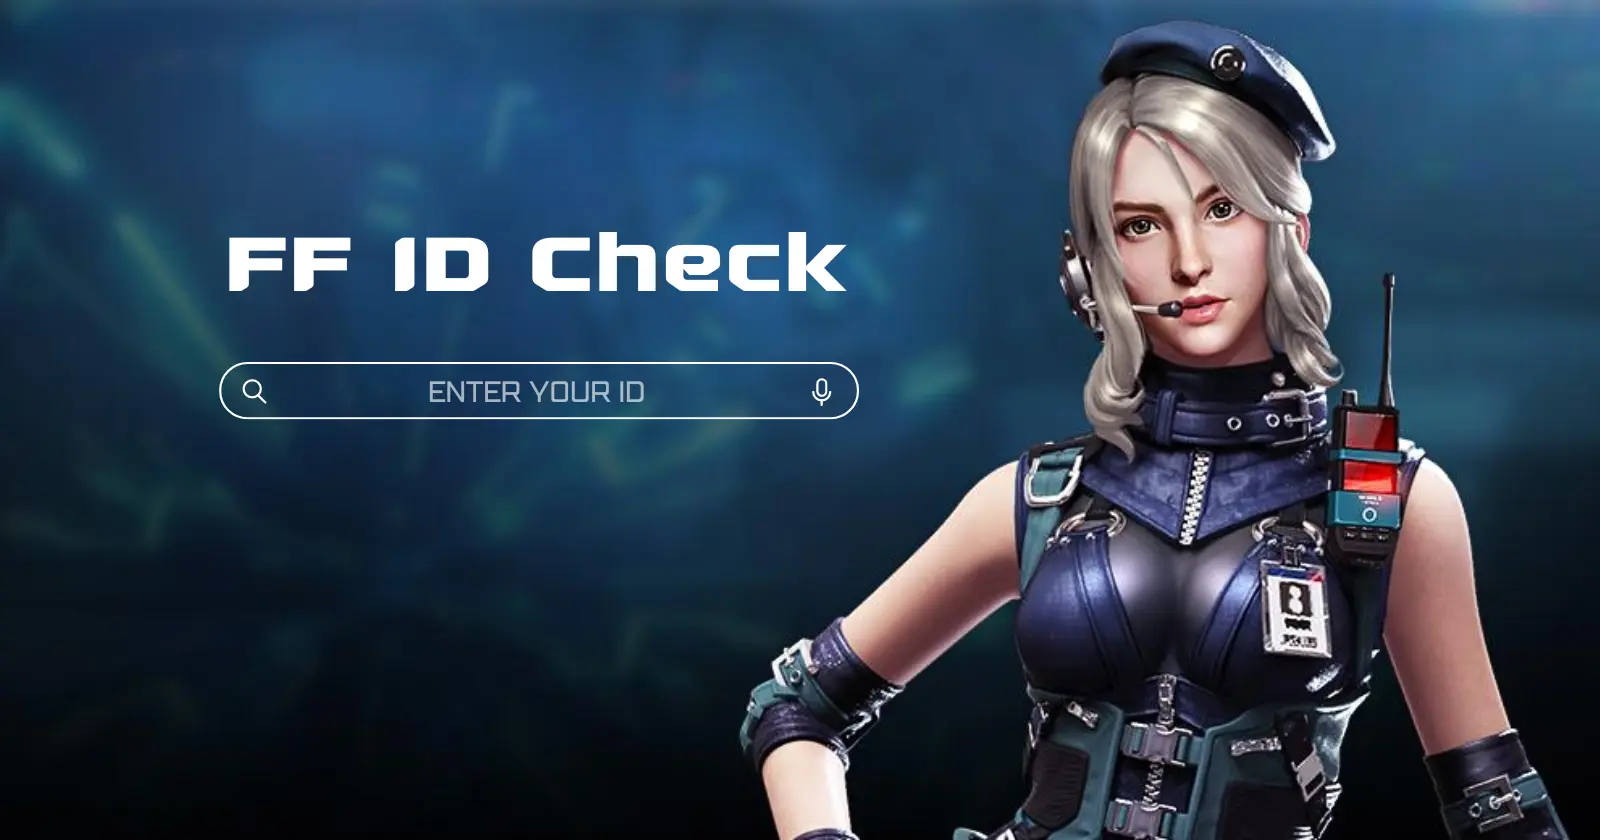 A female character from Free Fire on the right with a dark blue background titled "FF ID Check" with a search bar.